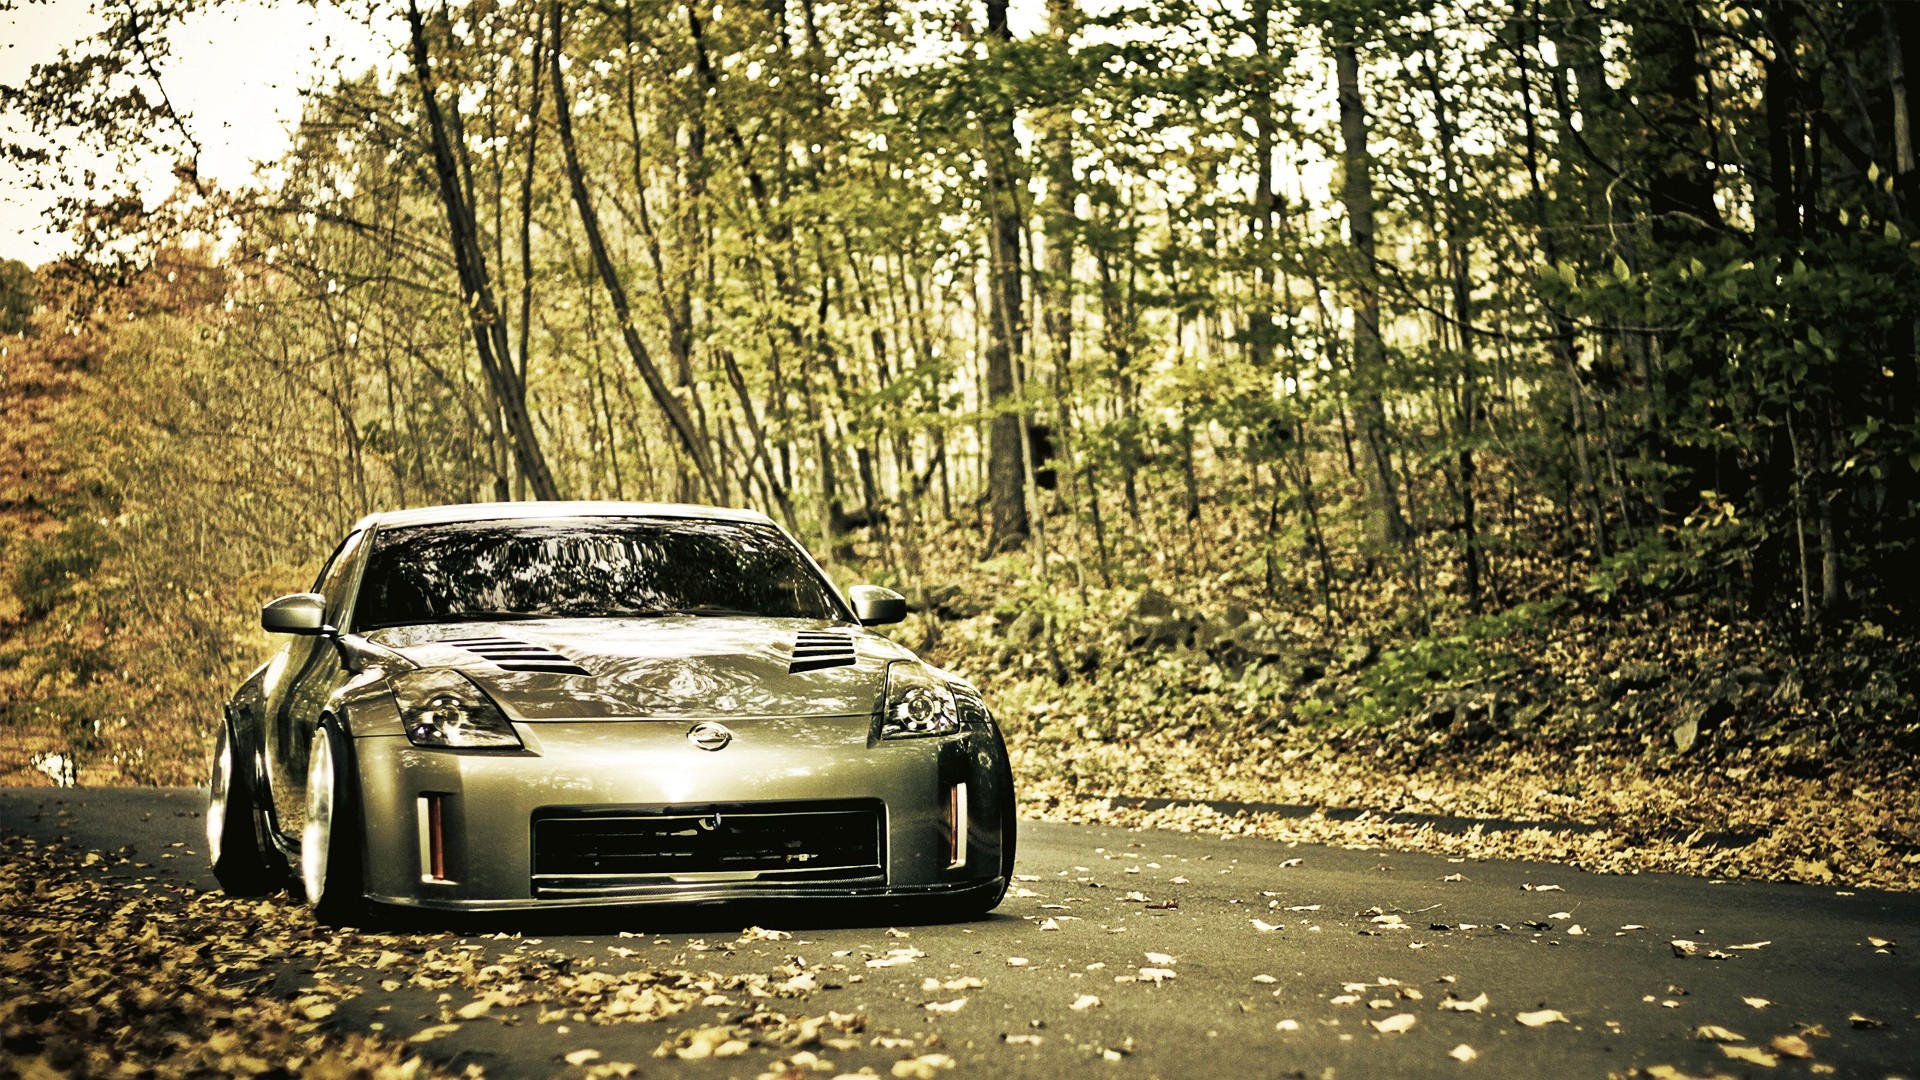 General 1920x1080 stance (cars) Nissan Nissan 350Z car road forest trees Nissan Fairlady Z vehicle Japanese cars